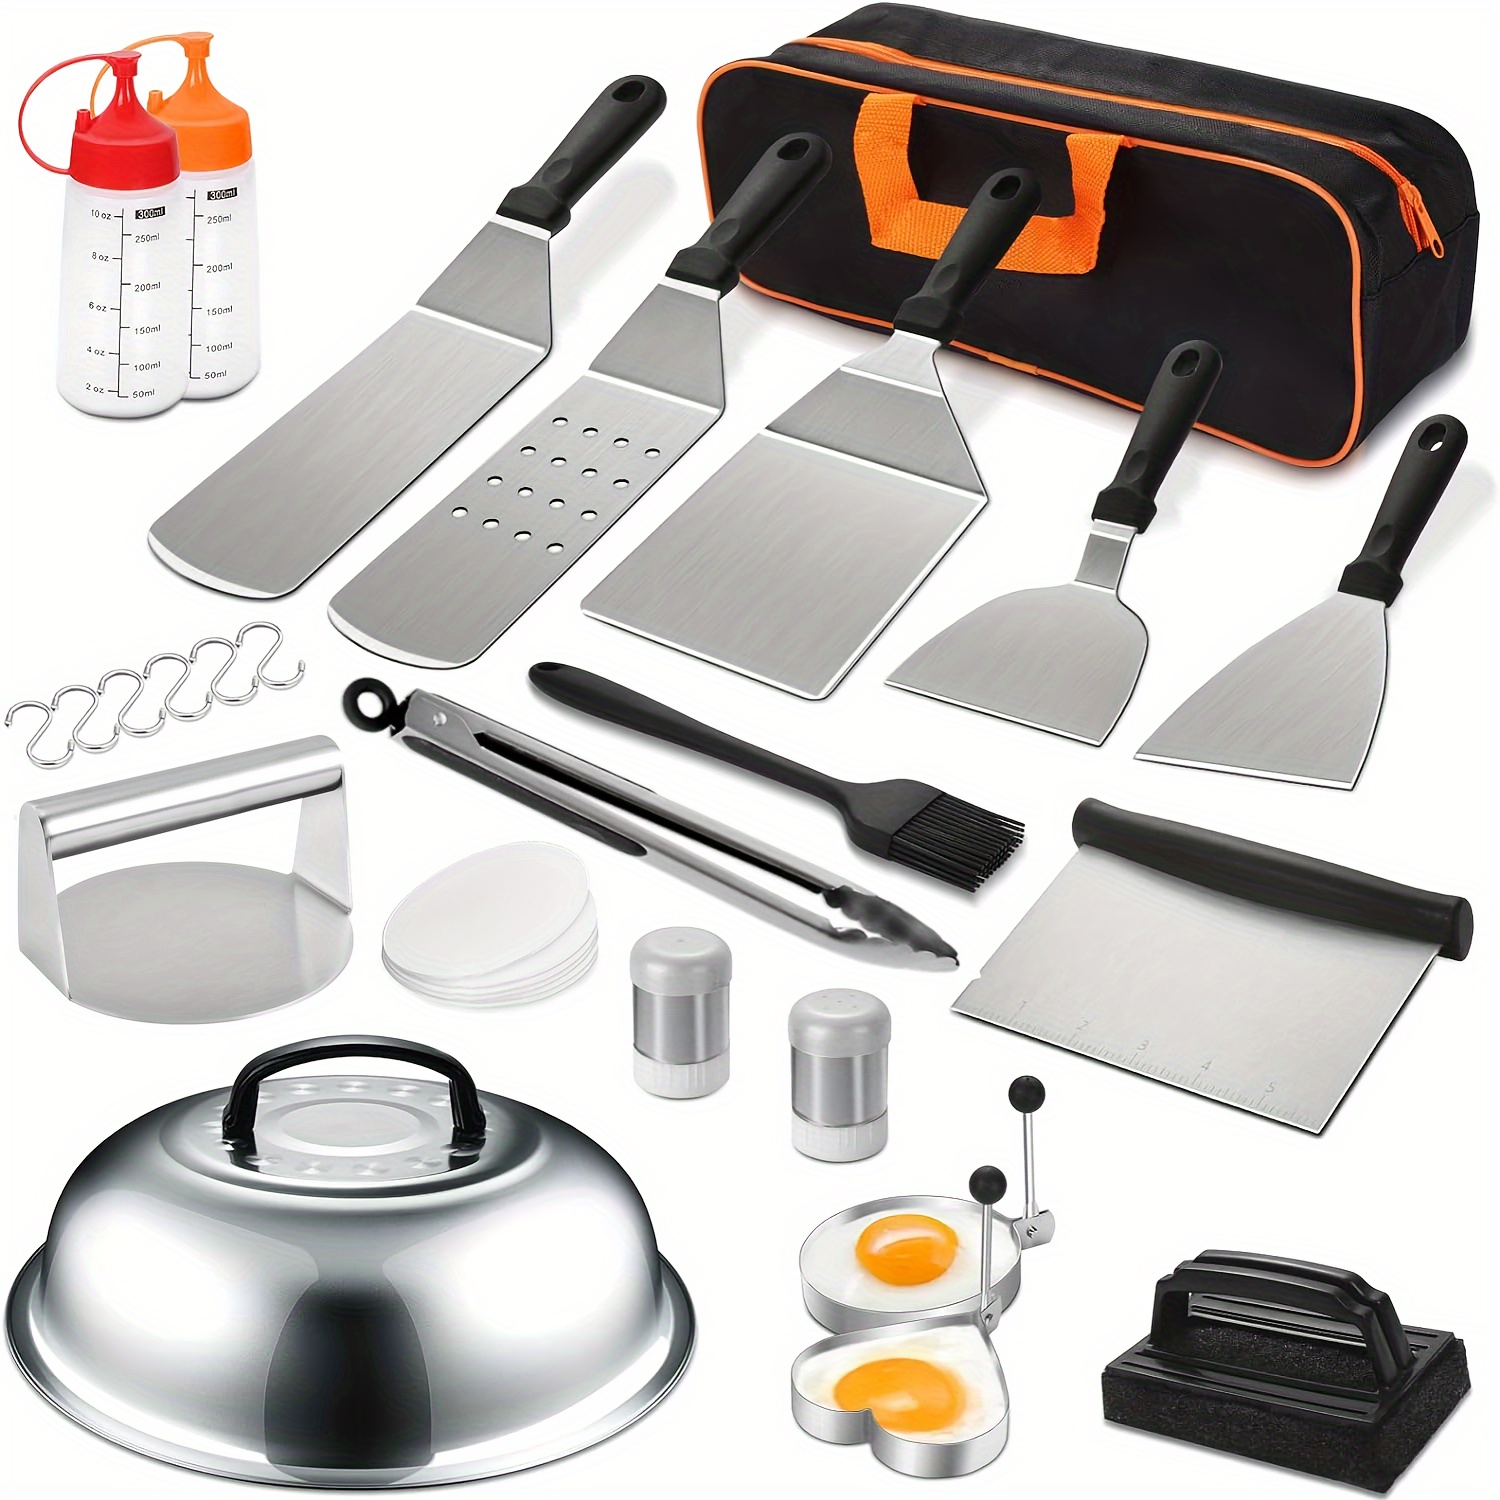 

25pcs Stainless Steel Accessories Set, Professional Flat Top Bbq Tools With Extended Spatulas, Scrapers, Egg Rings, Squeeze Bottles, For Outdoor Barbecue And Camping Chef Use